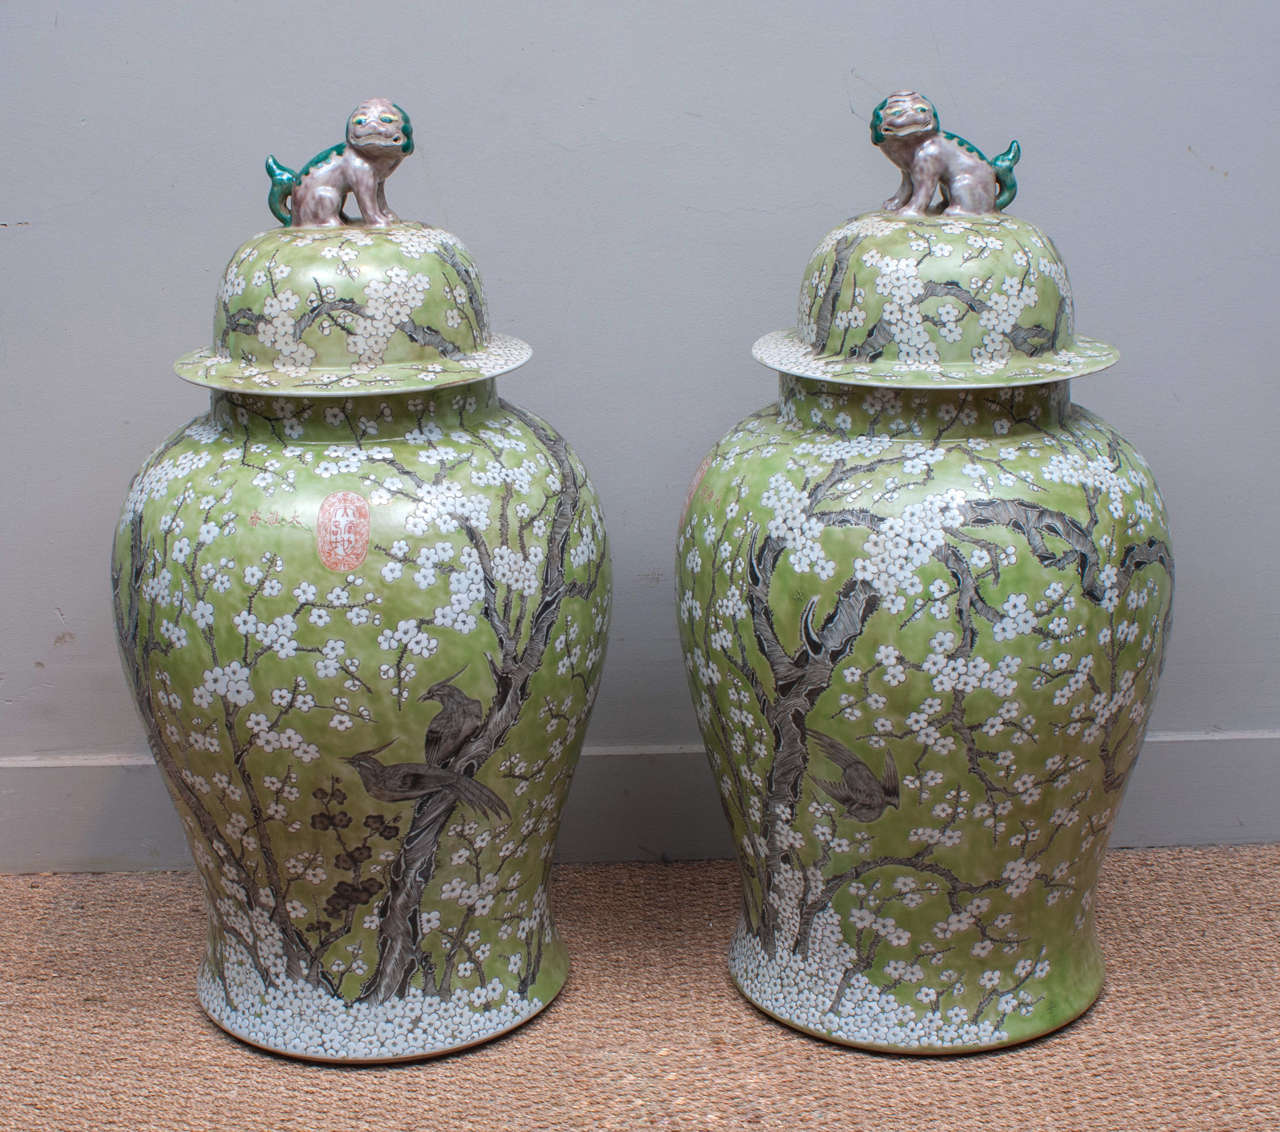 Exquisite pair of Chinese porcelain jars hand-painted by artisans from Jingdezhen, home to the Imperial kilns of the Emperors of ancient China.